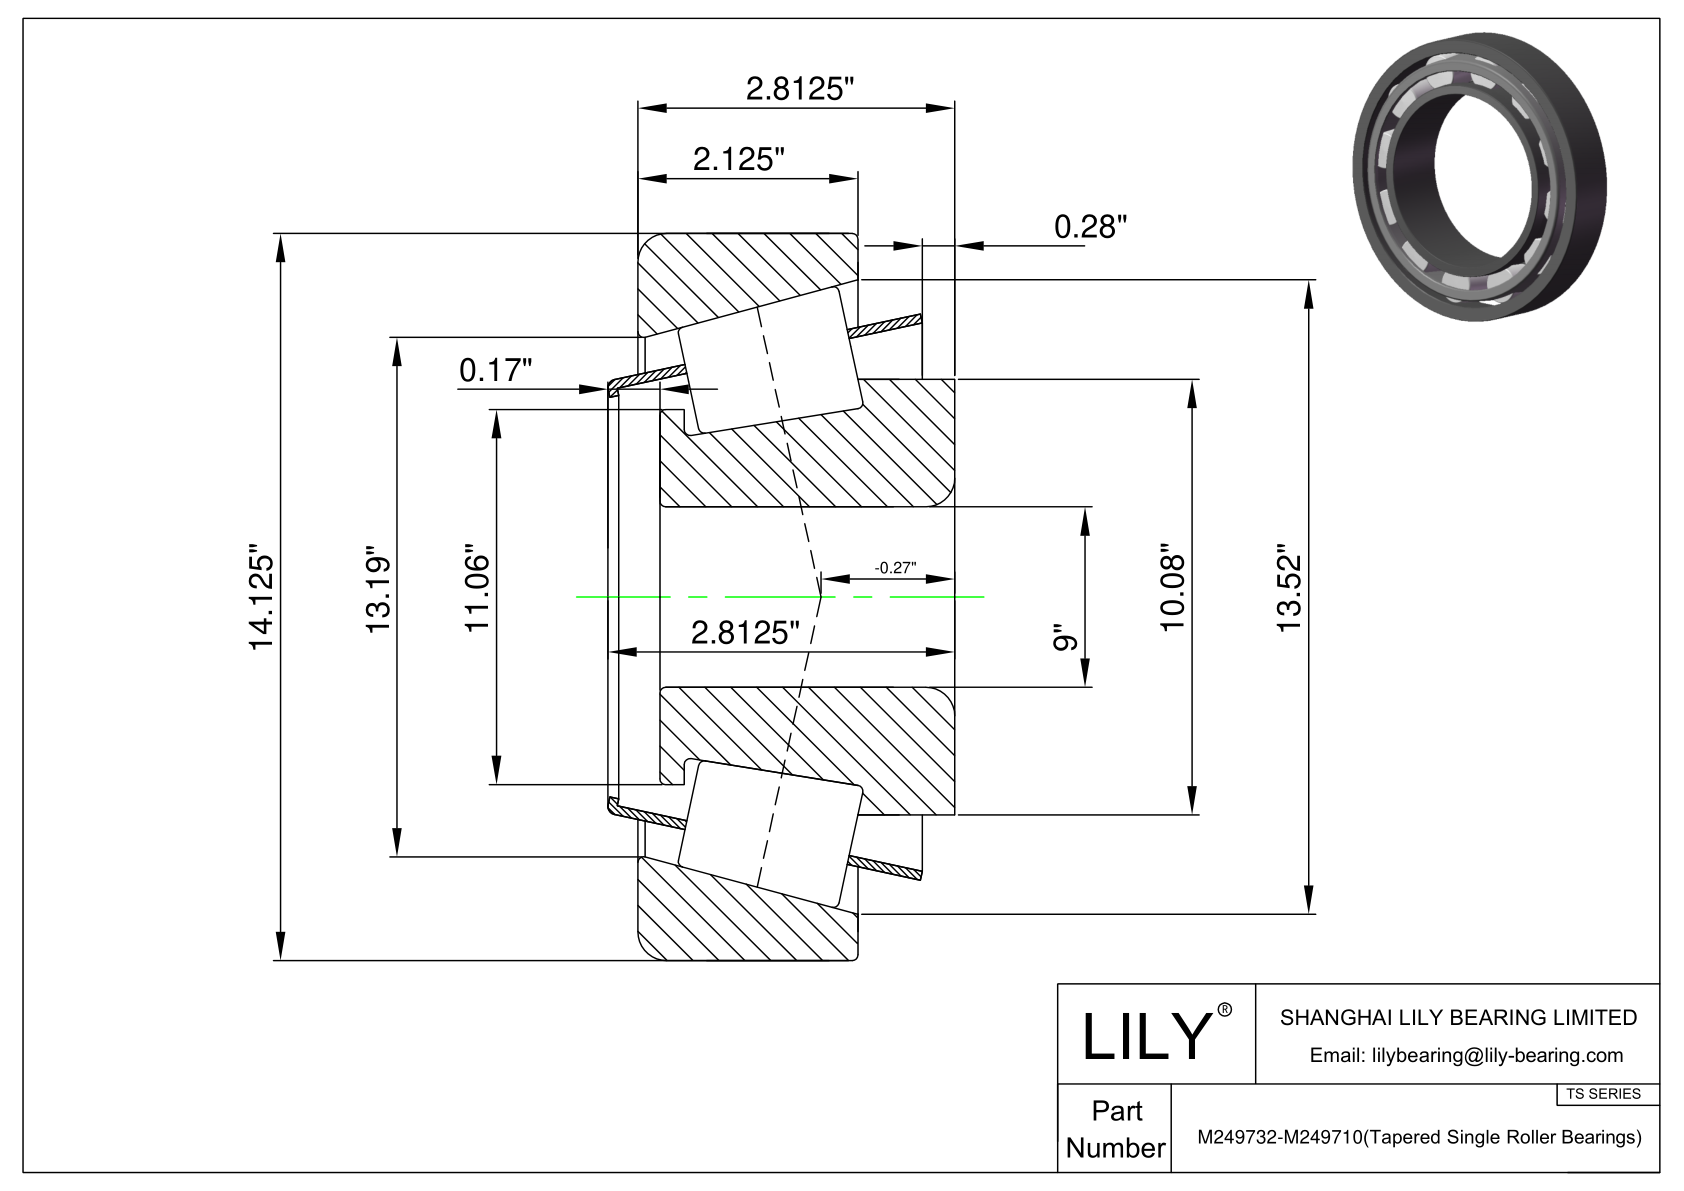 M249732-M249710 TS (Tapered Single Roller Bearings) (Imperial) cad drawing